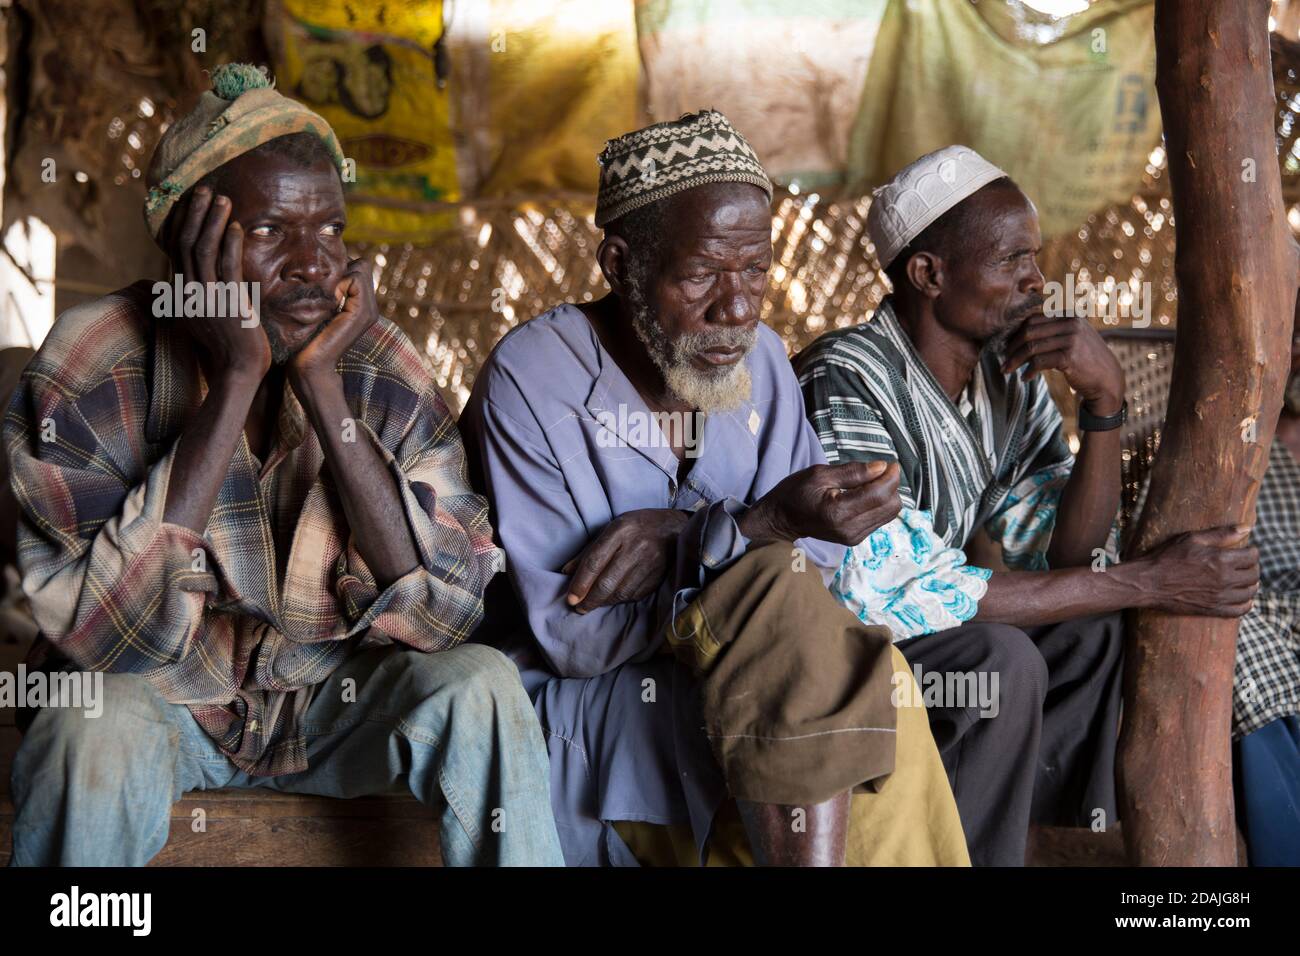 Delaba Koro, village 60 kms from Selingue, Mali, 27th April 2015; This village took many people displaced by the dam. Elders lister as  Oualama Doumbia, 56, speaks. He is a farmer, fisherman, hunter, and son of the previous chief. His expectations of the dam have not been met - he hoped for good health services, clean water, electricity and an overall improvement in agriculture, but 30 years later there is still no electricity, only one broken pump, the medical centre is not well equipped and there is only primary school for the children.  His family were amongst the village’s first settlers.  Stock Photo